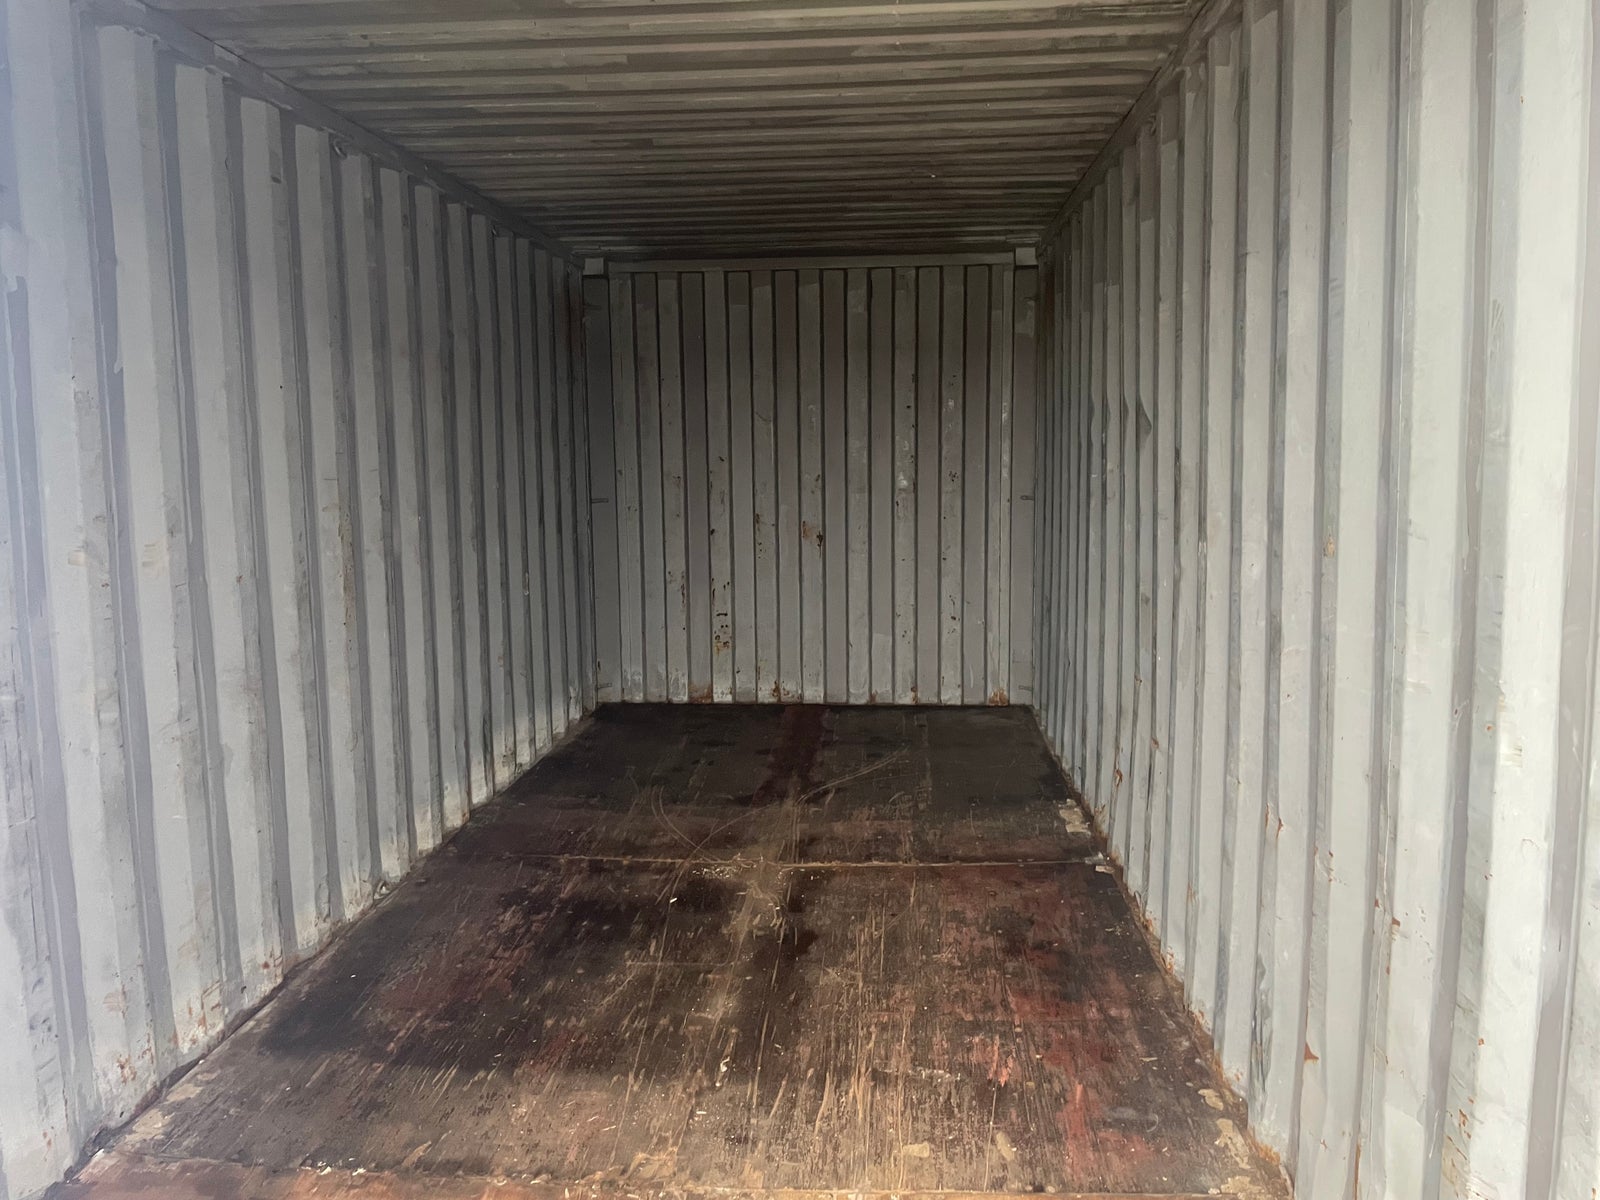 20 fods Container - ID: ASIU 391015-0